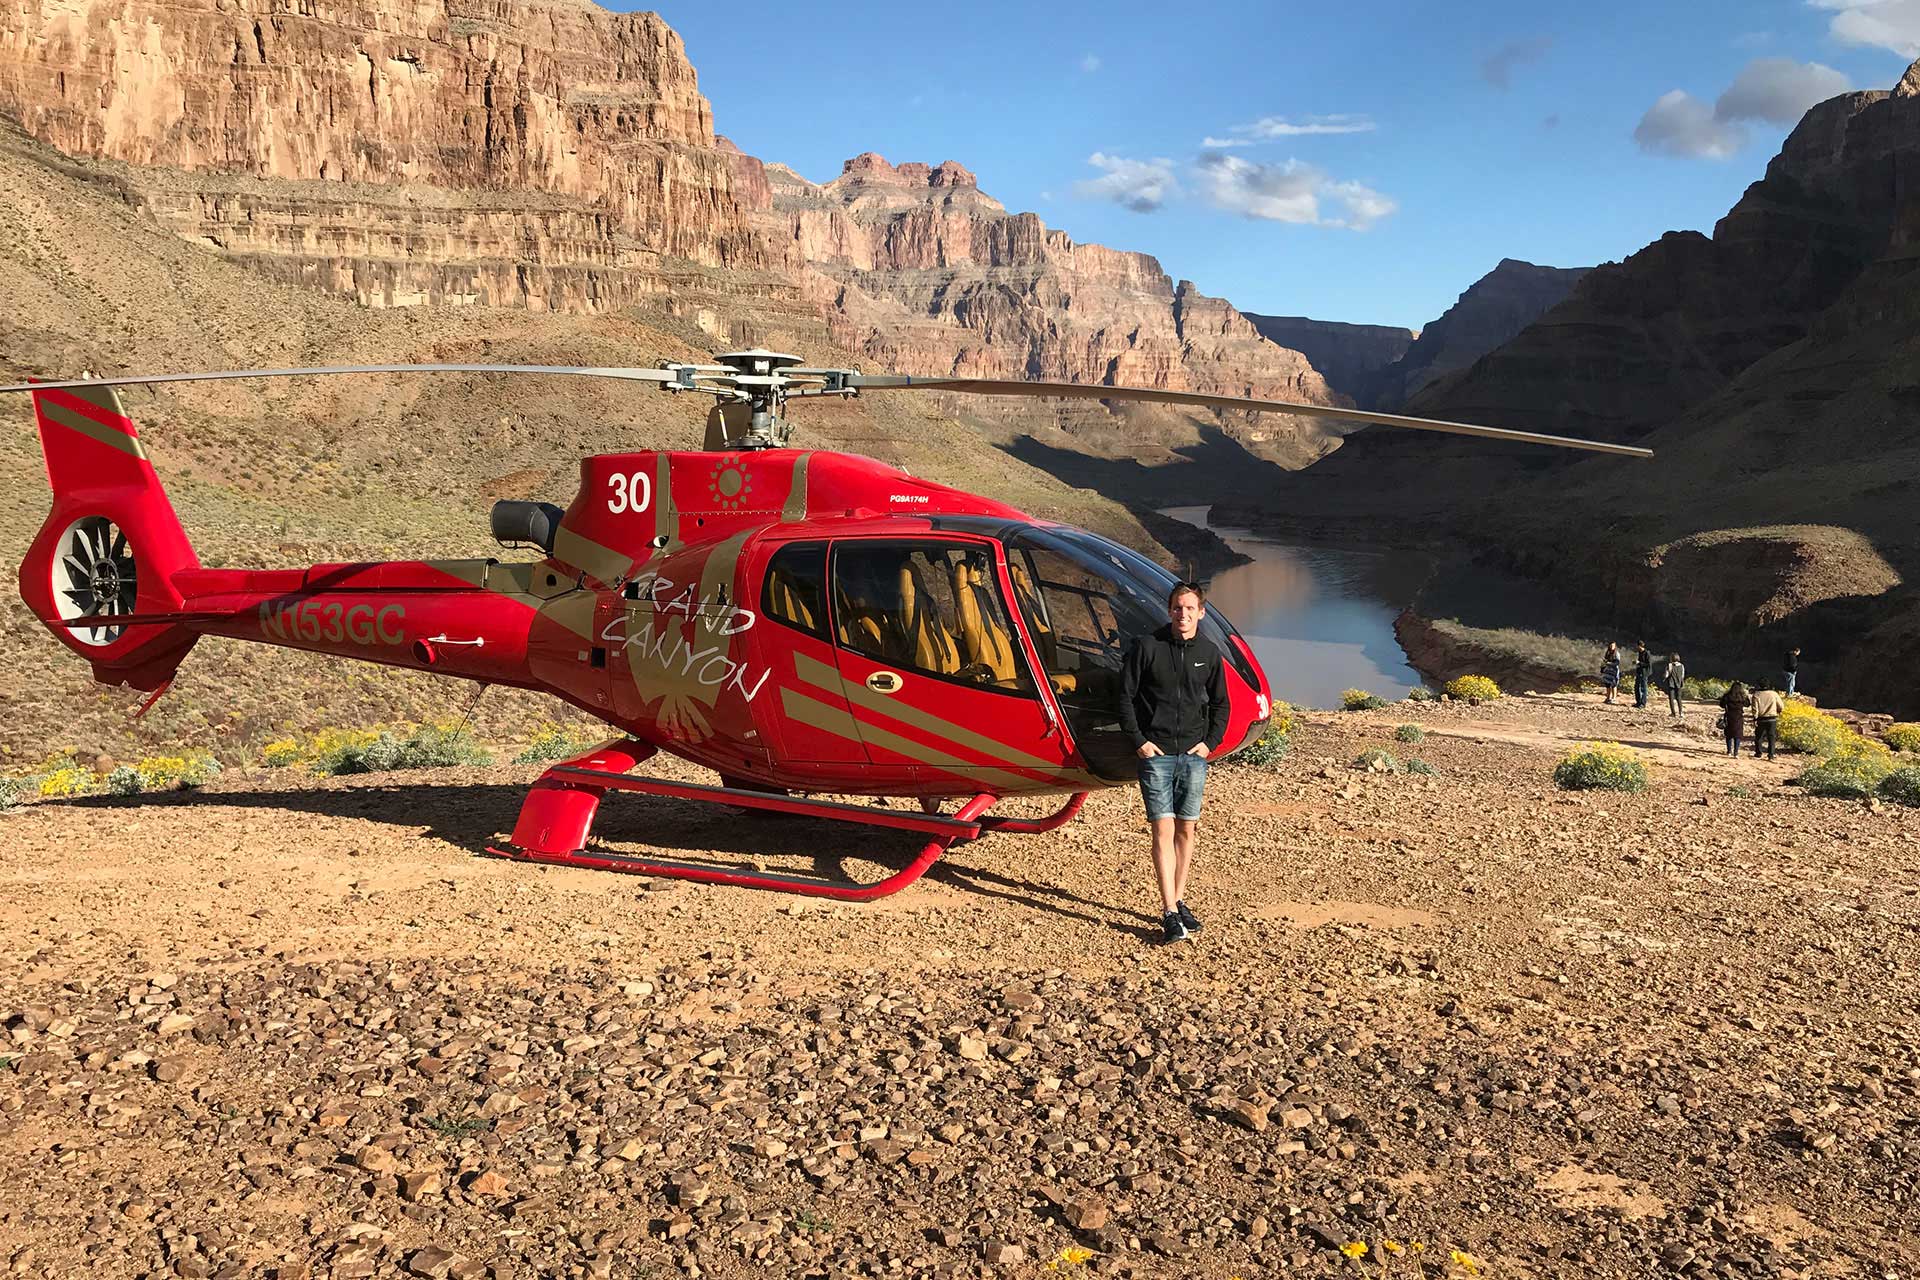 David Simpson and helicopter in Grand Canyon, USA. Helicopter tour over the Grand Canyon